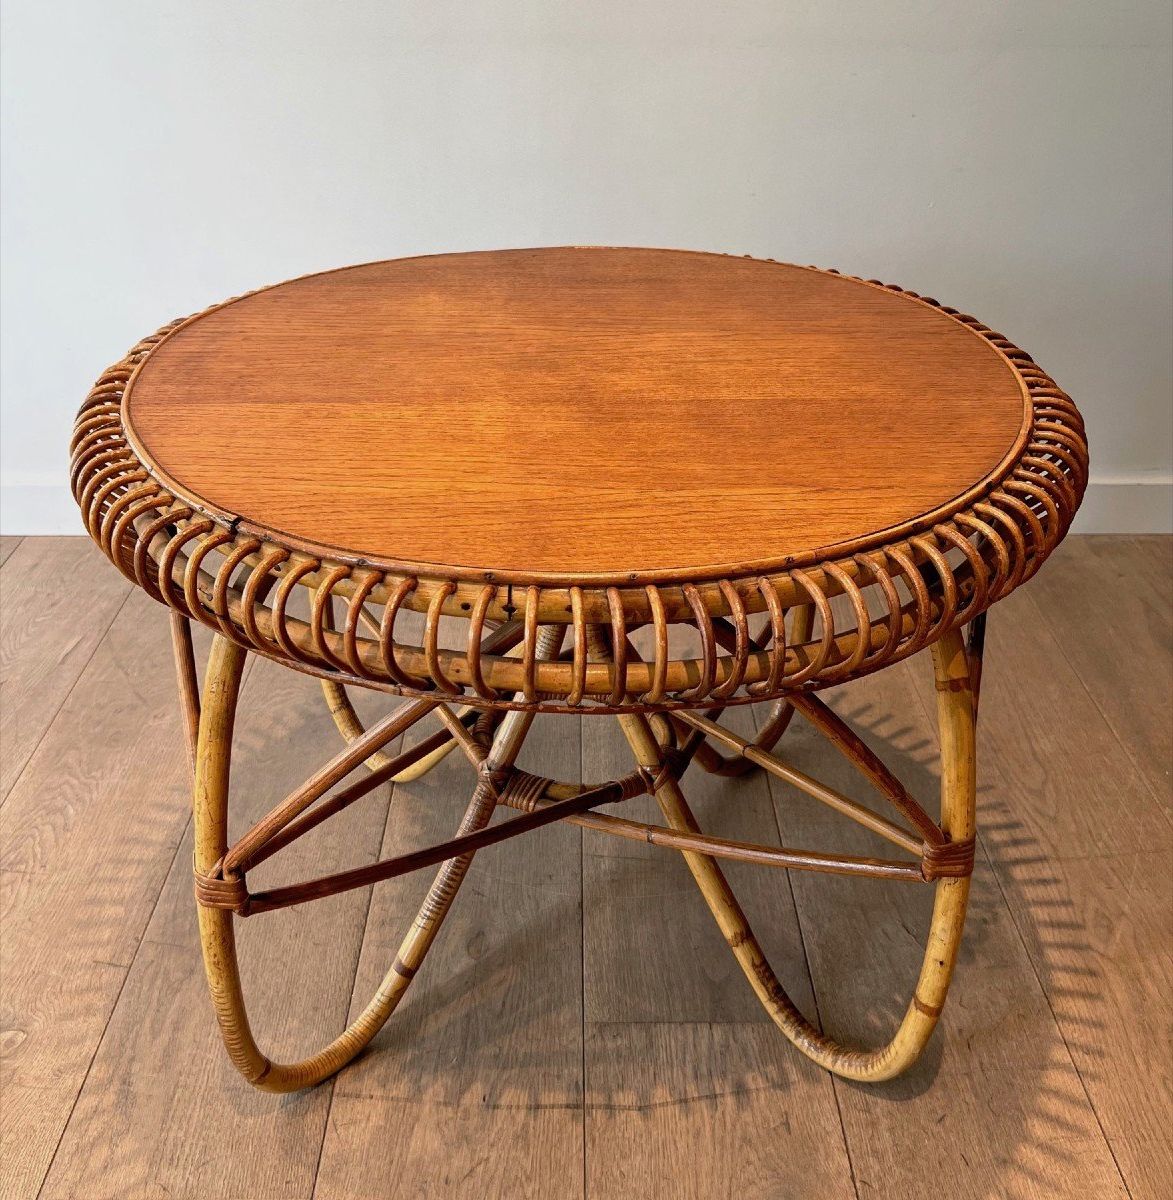 Most Current Coffee Tables With Round Wooden Tops Intended For Proantic: Round Rattan Coffee Table With A Wooden Top (View 10 of 10)